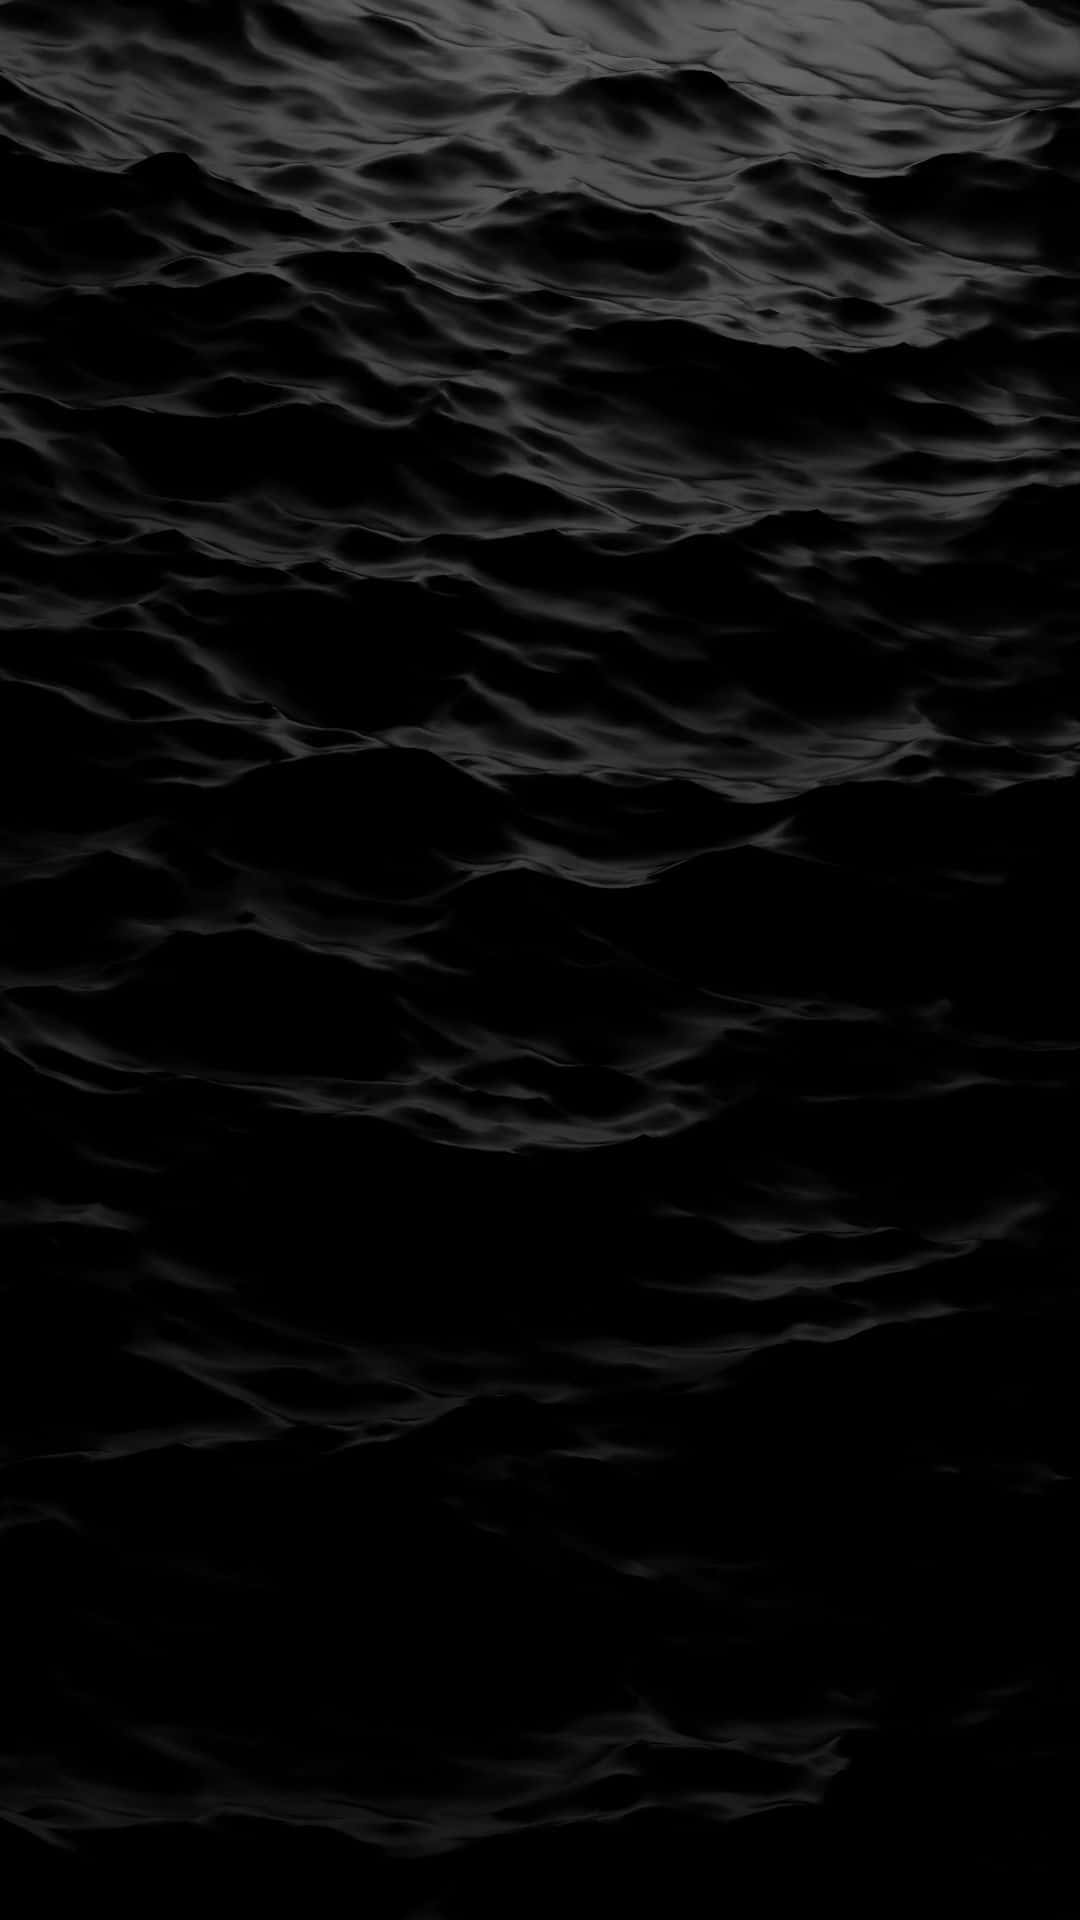 a black and white image of the ocean